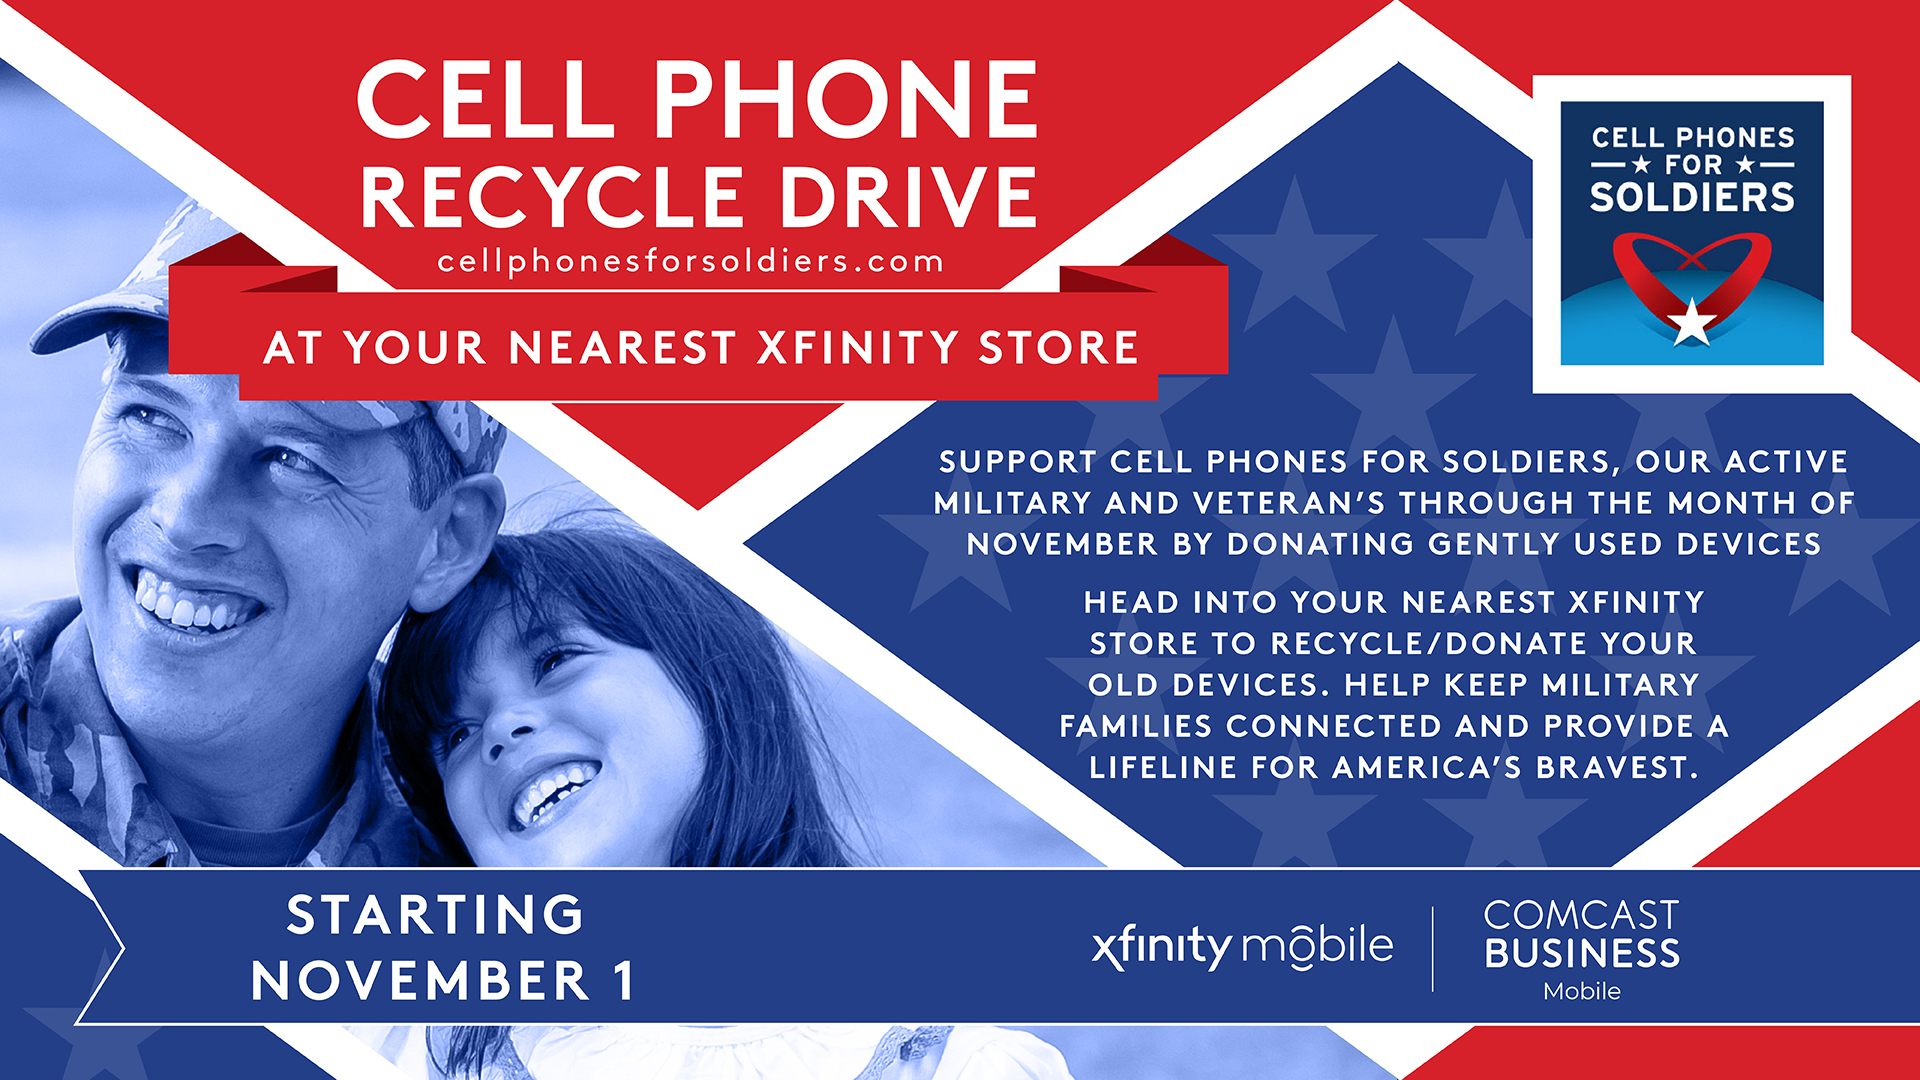 Cell Phone Recycle Drive flyer